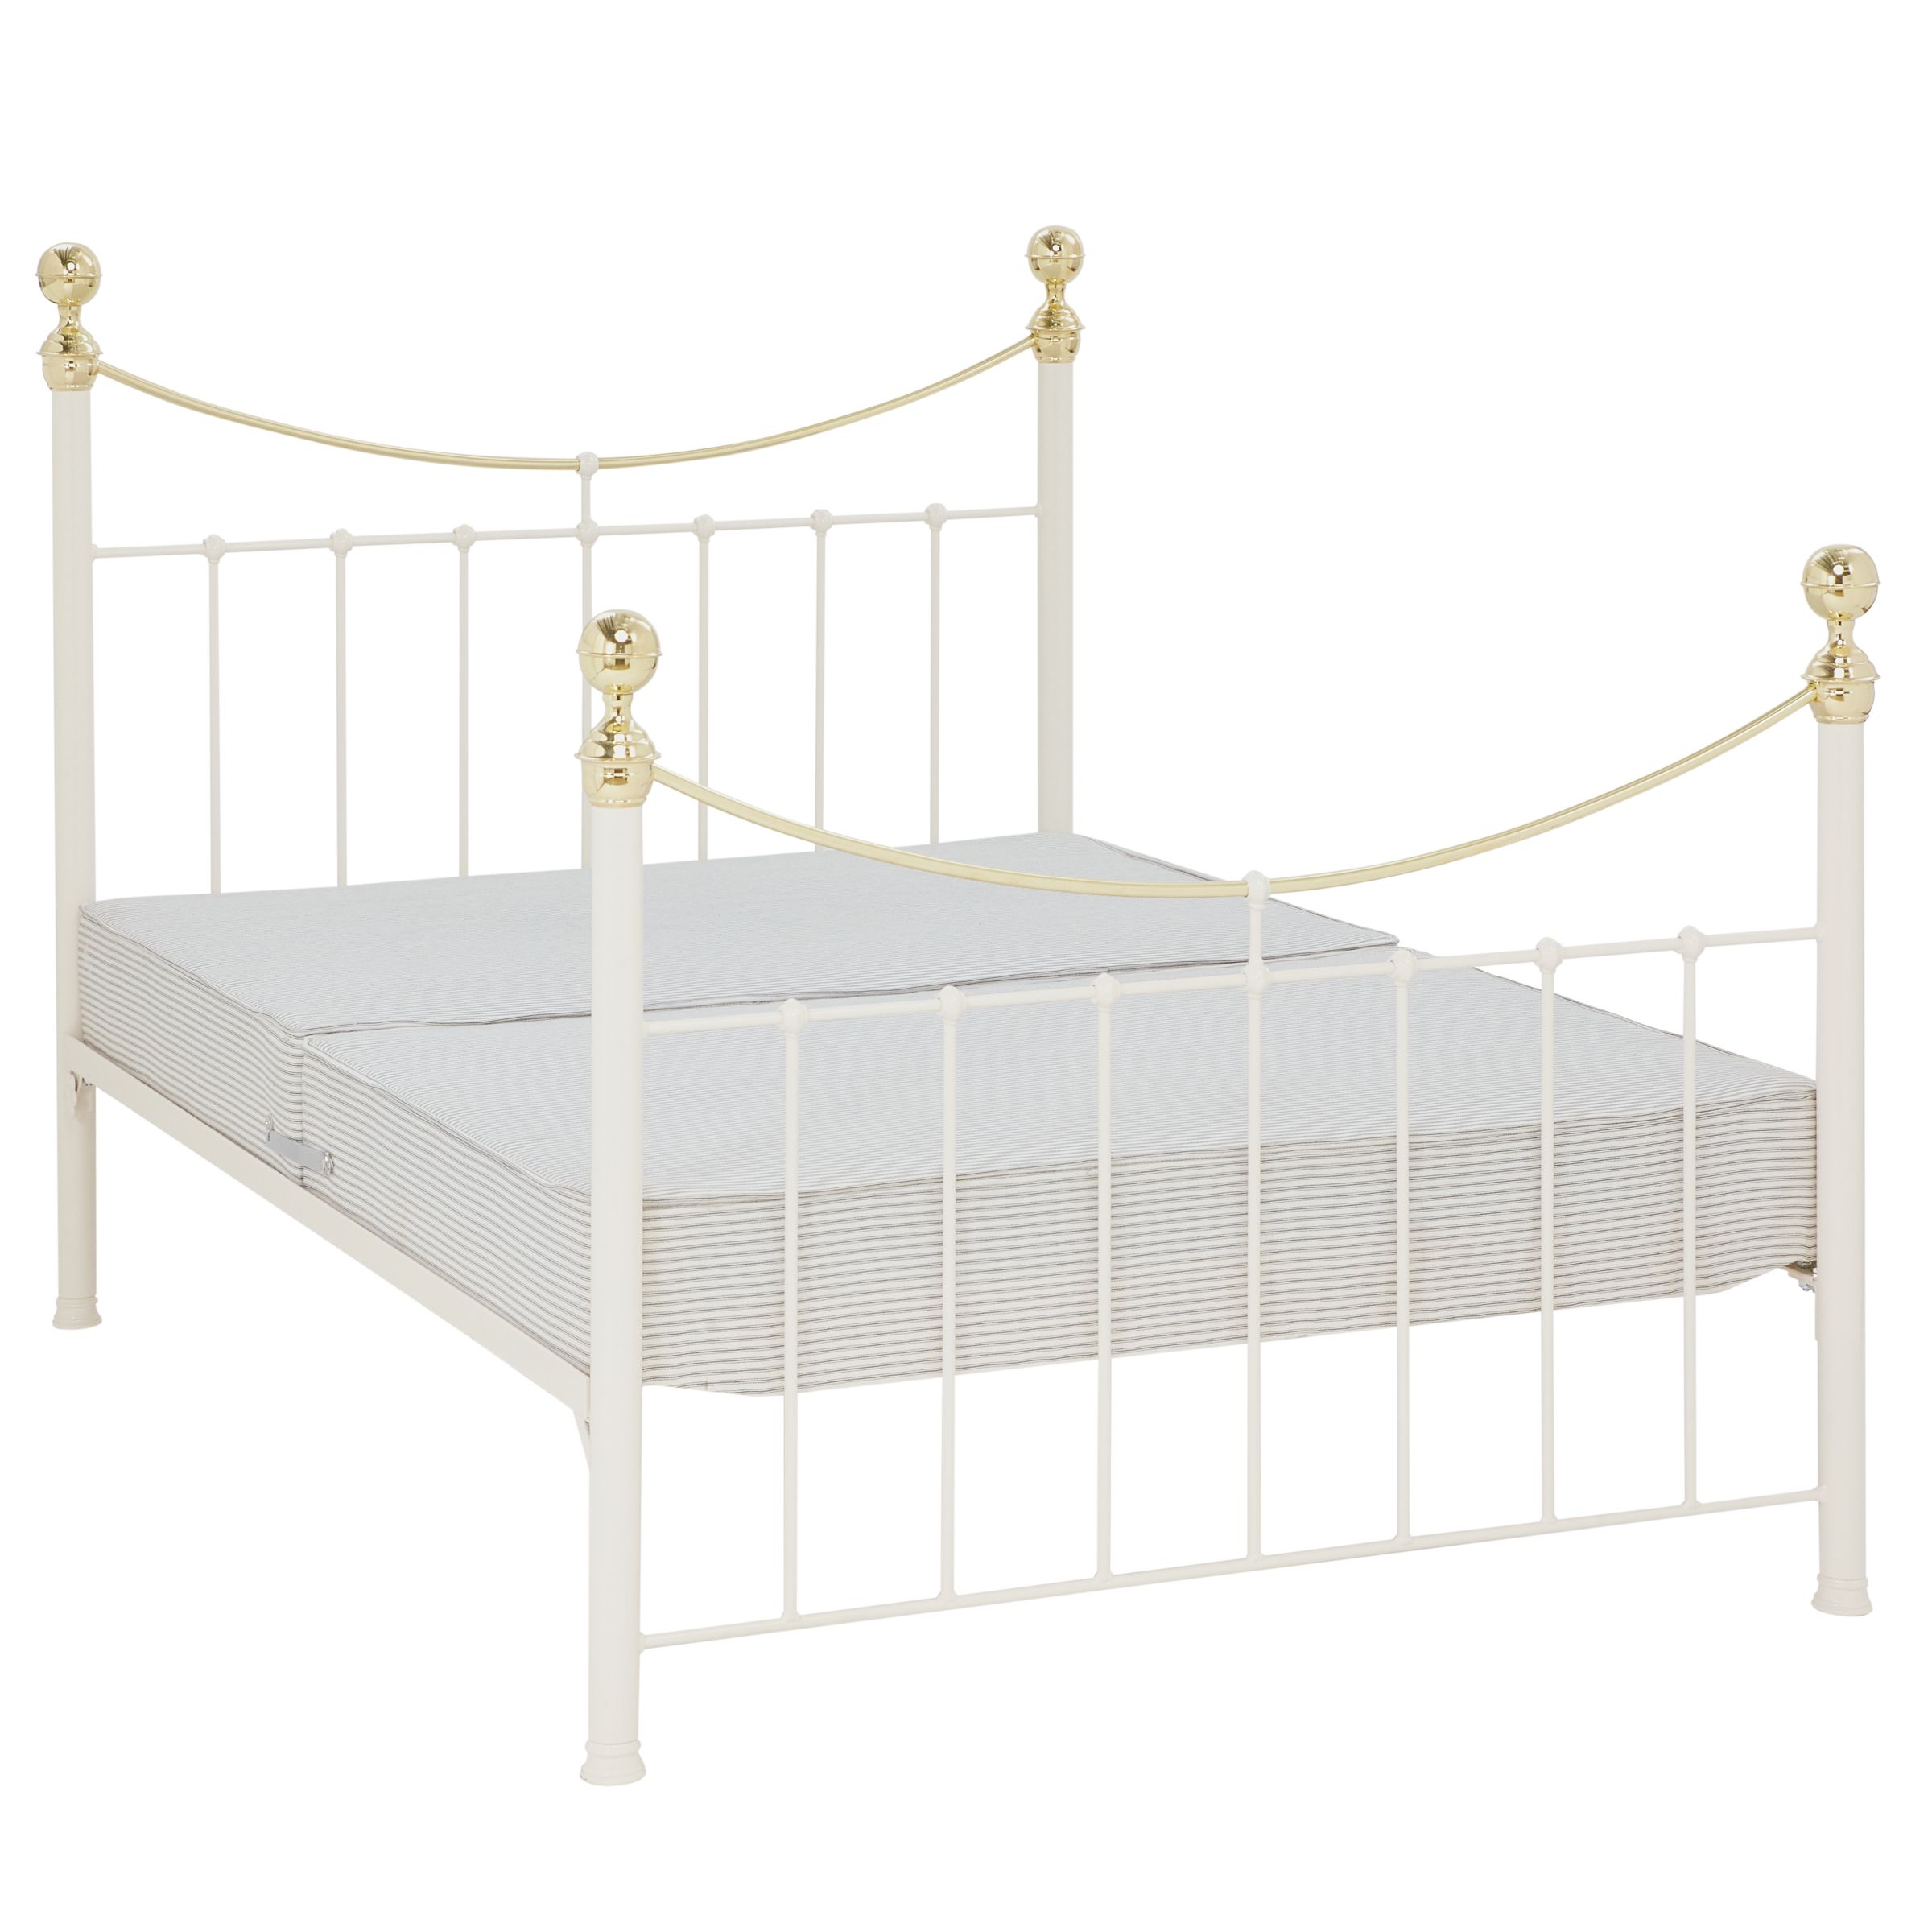 Wrought Iron And Brass Bed Co. Victoria Sprung Bed Frame, King Size, Ivory